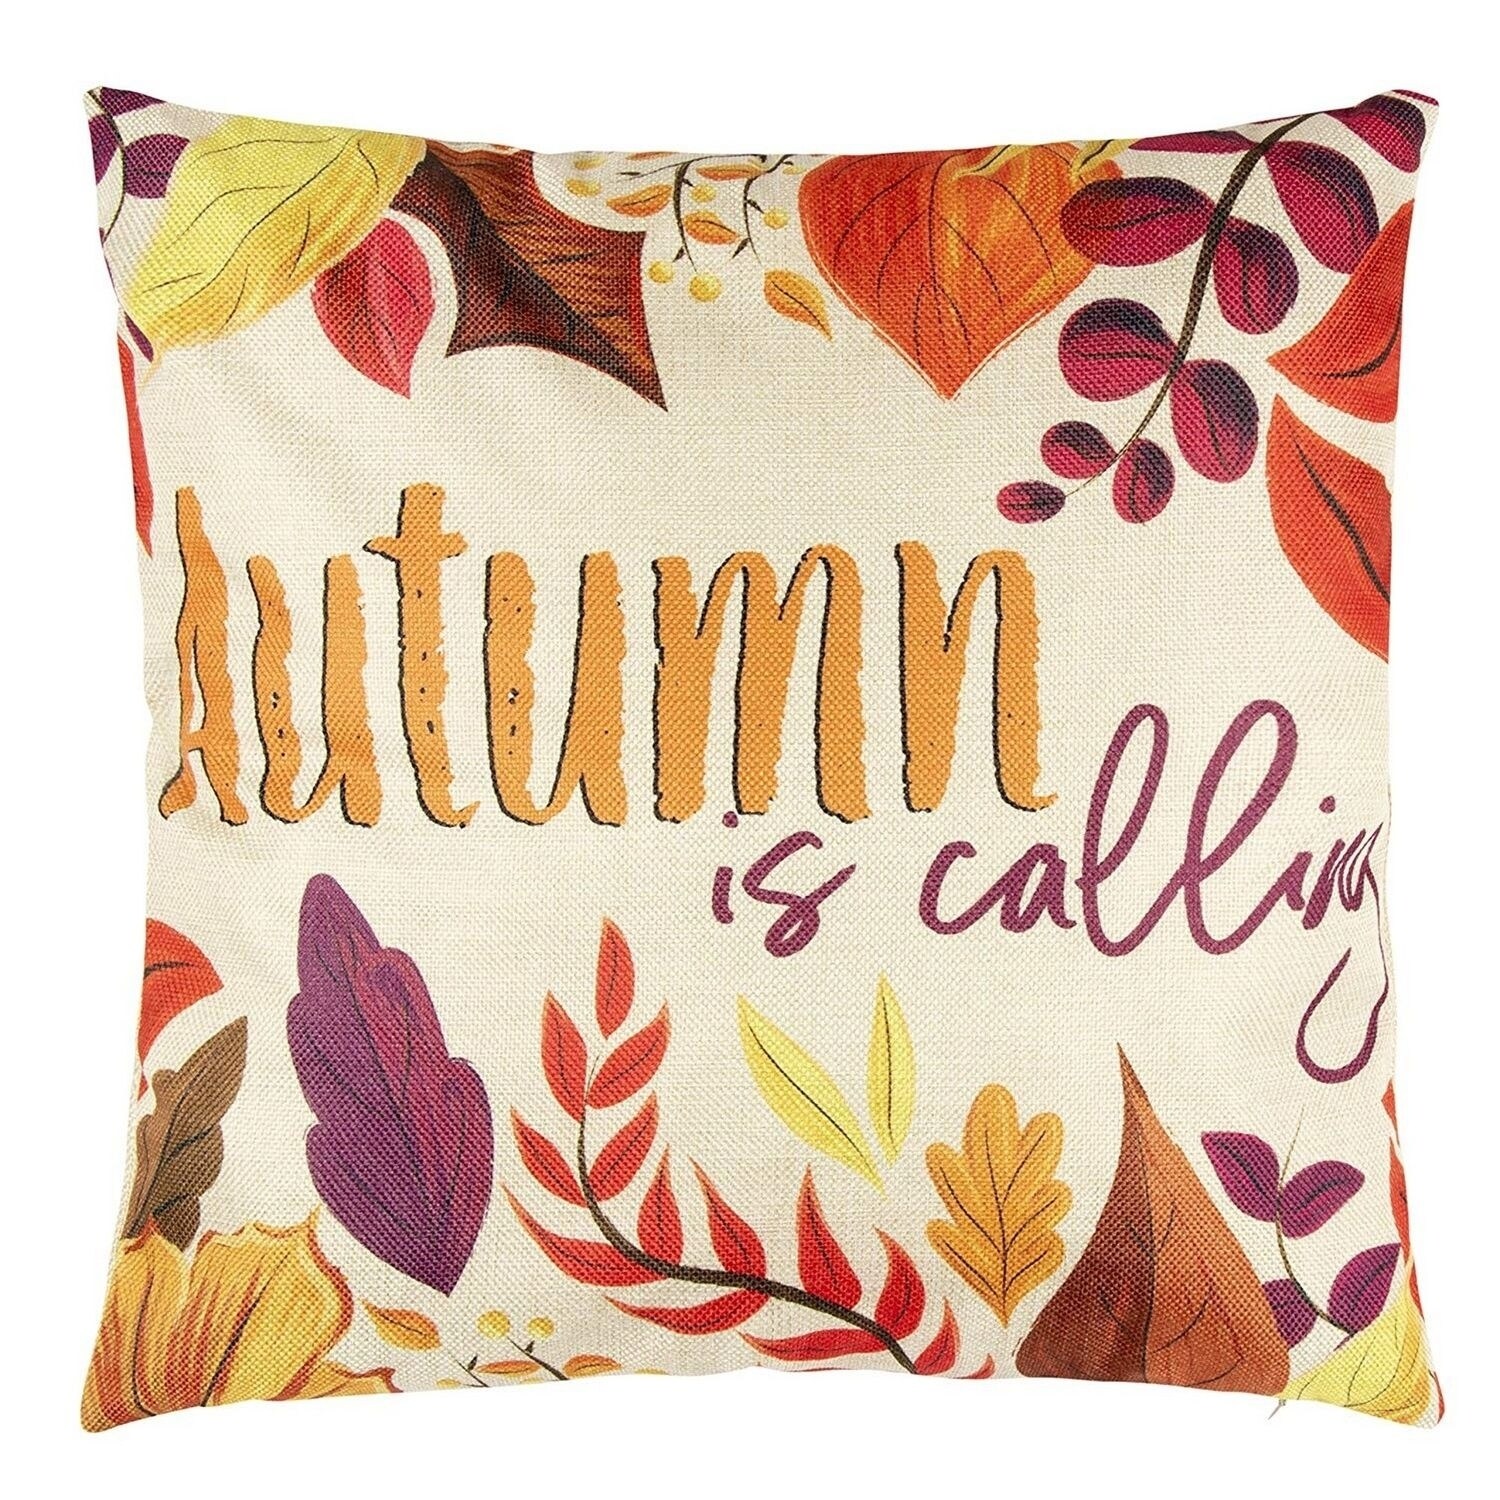 Set of 4 Fall Pillow Covers 18x18 Inch Thanksgiving Throw 18*18 inch Y-fall  09